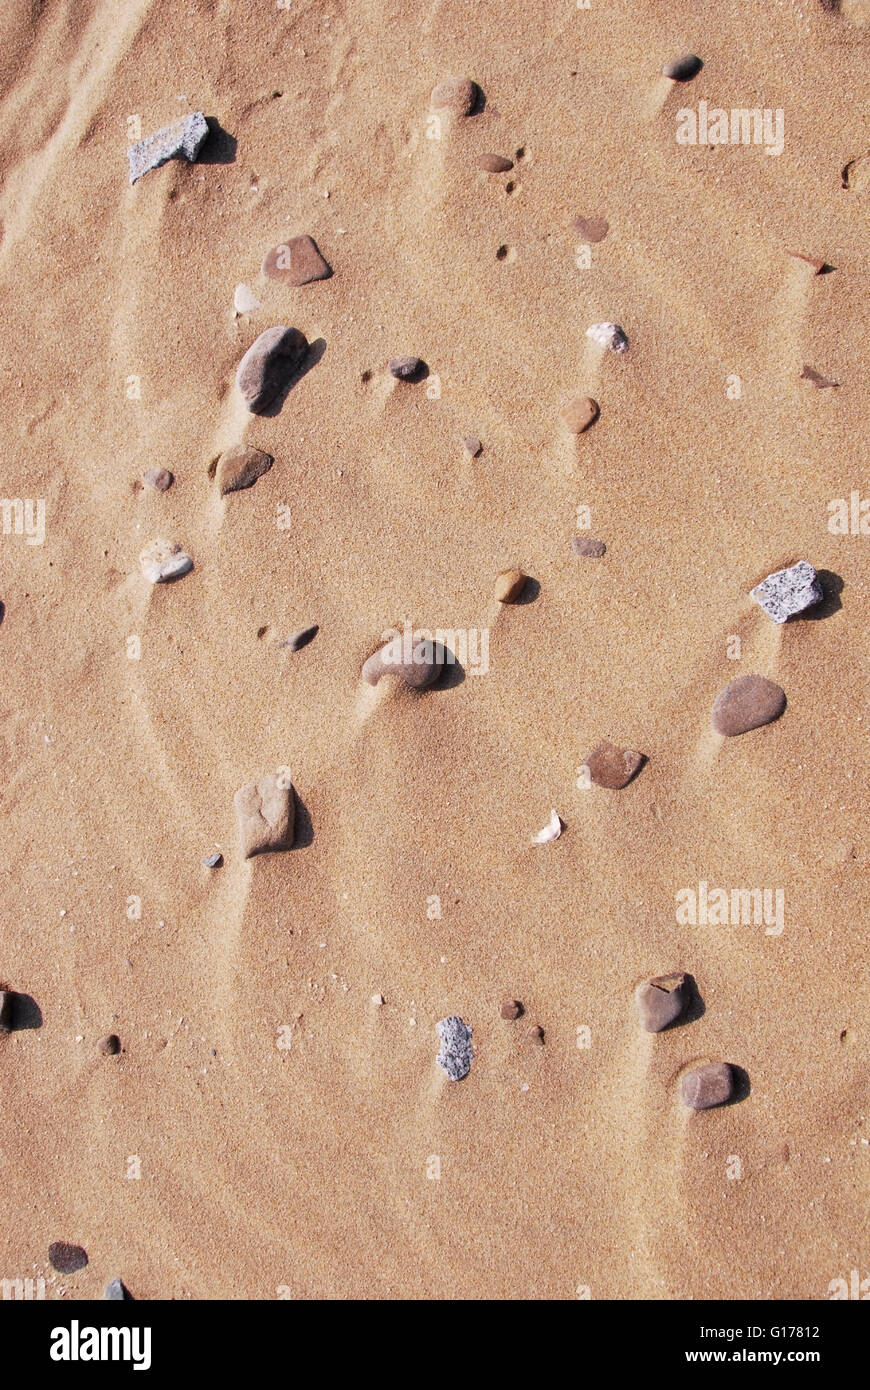 There are small stones on the brown sand of the beach Stock Photo